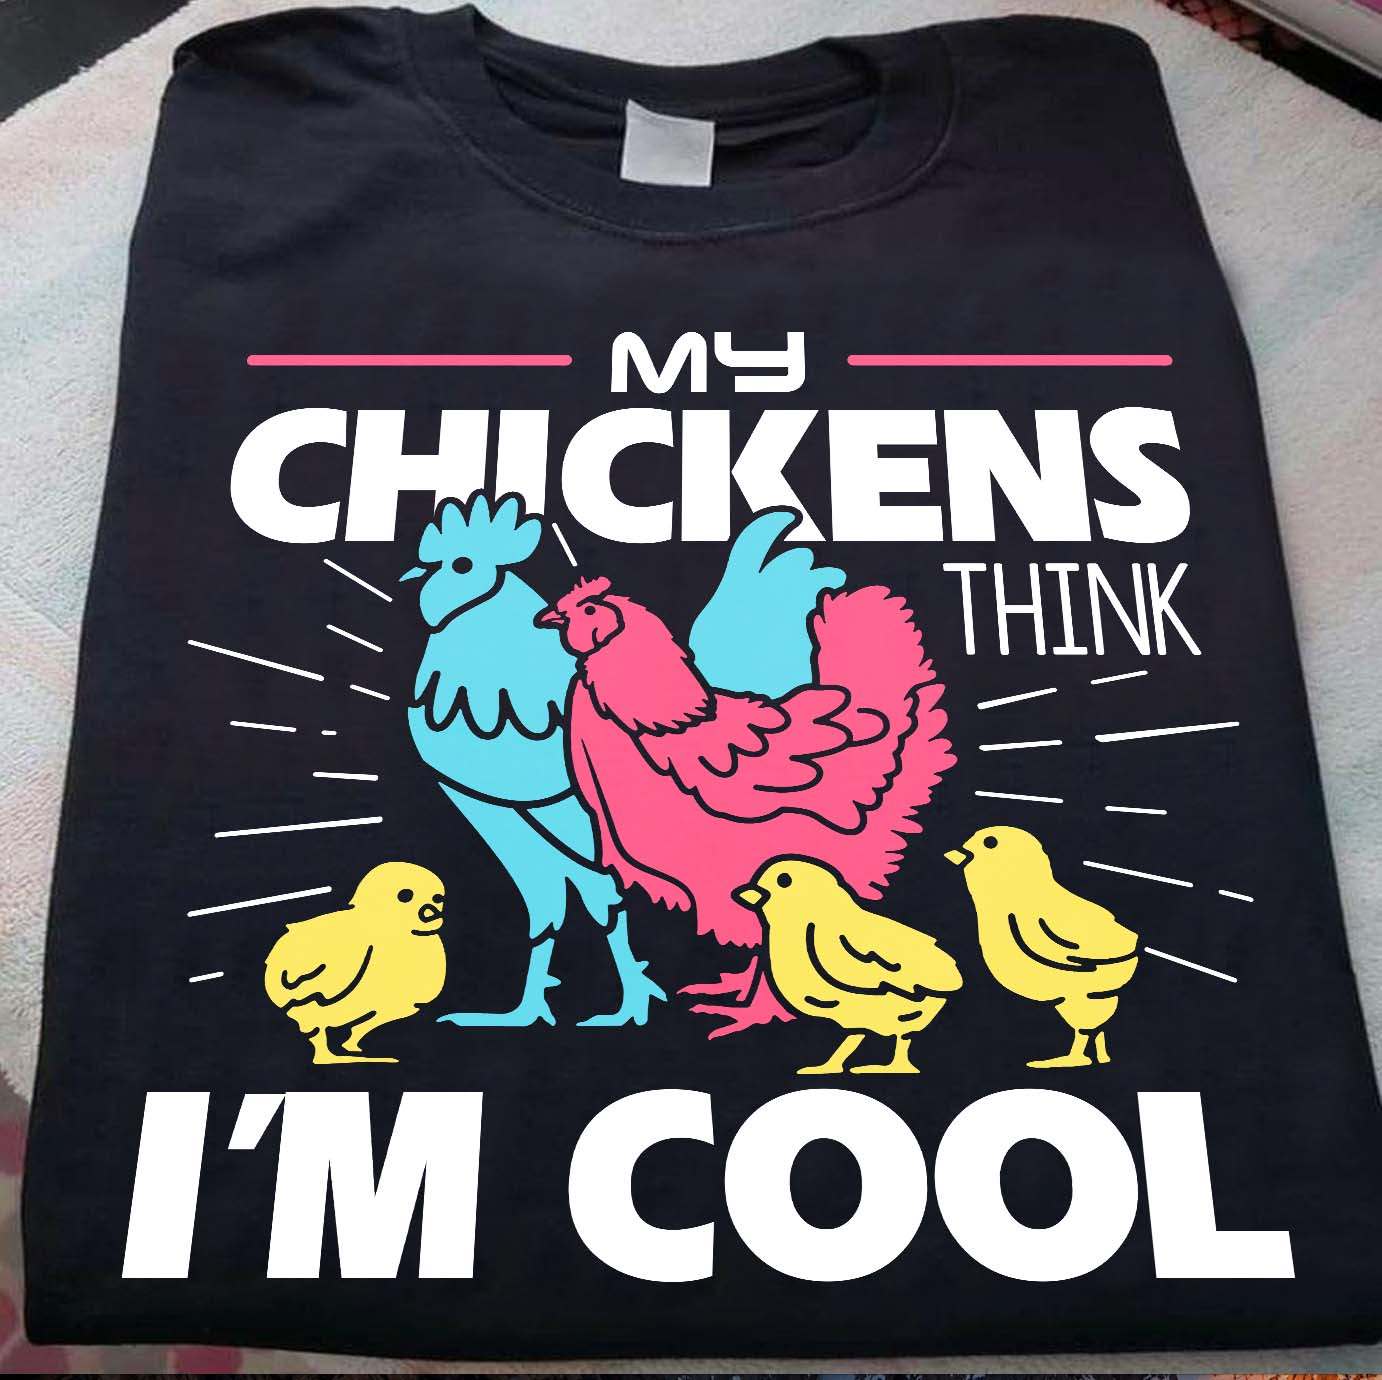 My chickens think I'm cool - Chicken lover T-shirt